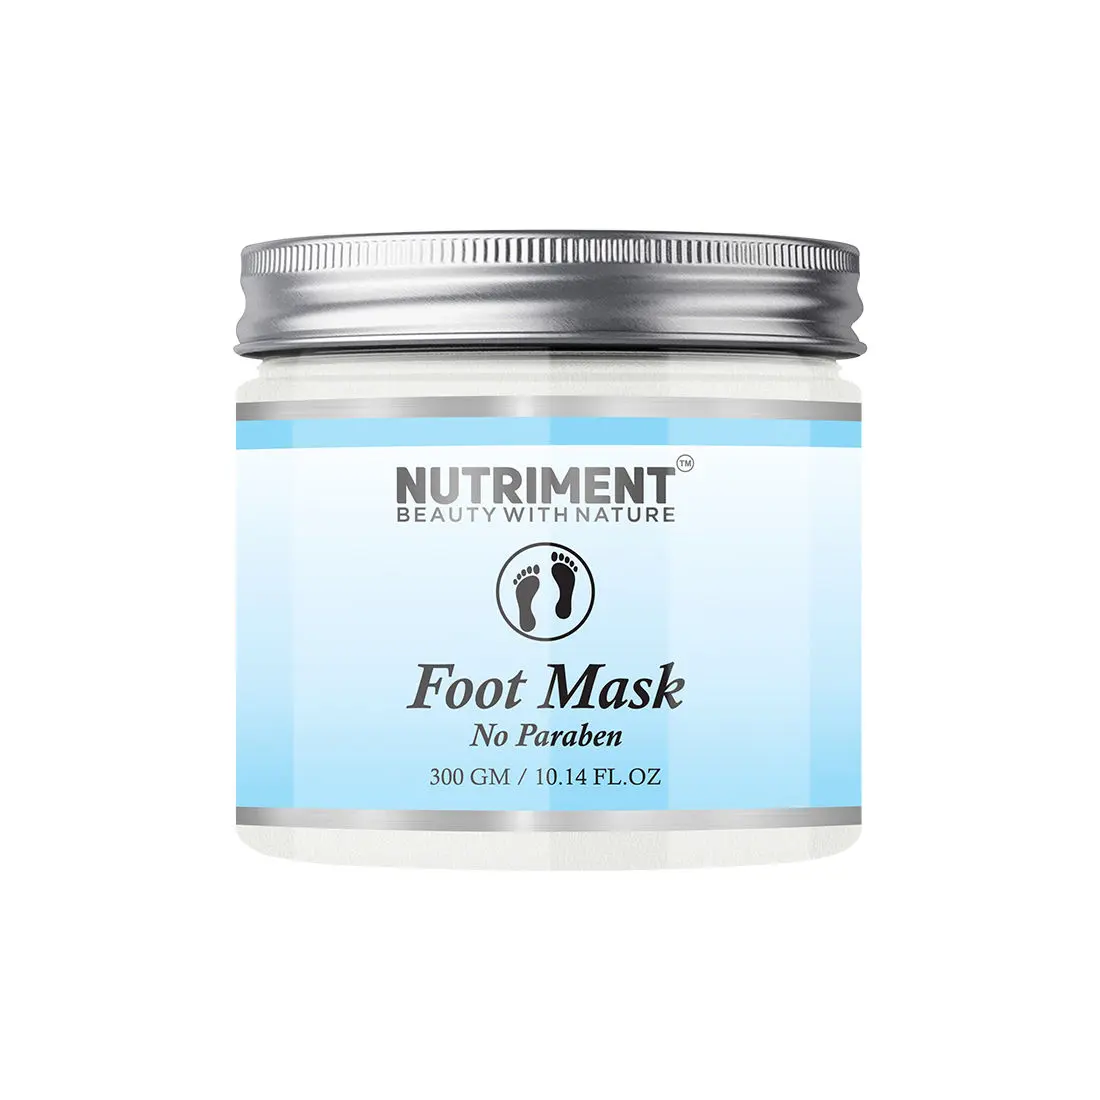 Nutriment Foot Mask for Hydrating Skin, Removing Oil and Improves Pores, Paraben Free (300 g), Suitable for all Skin Types